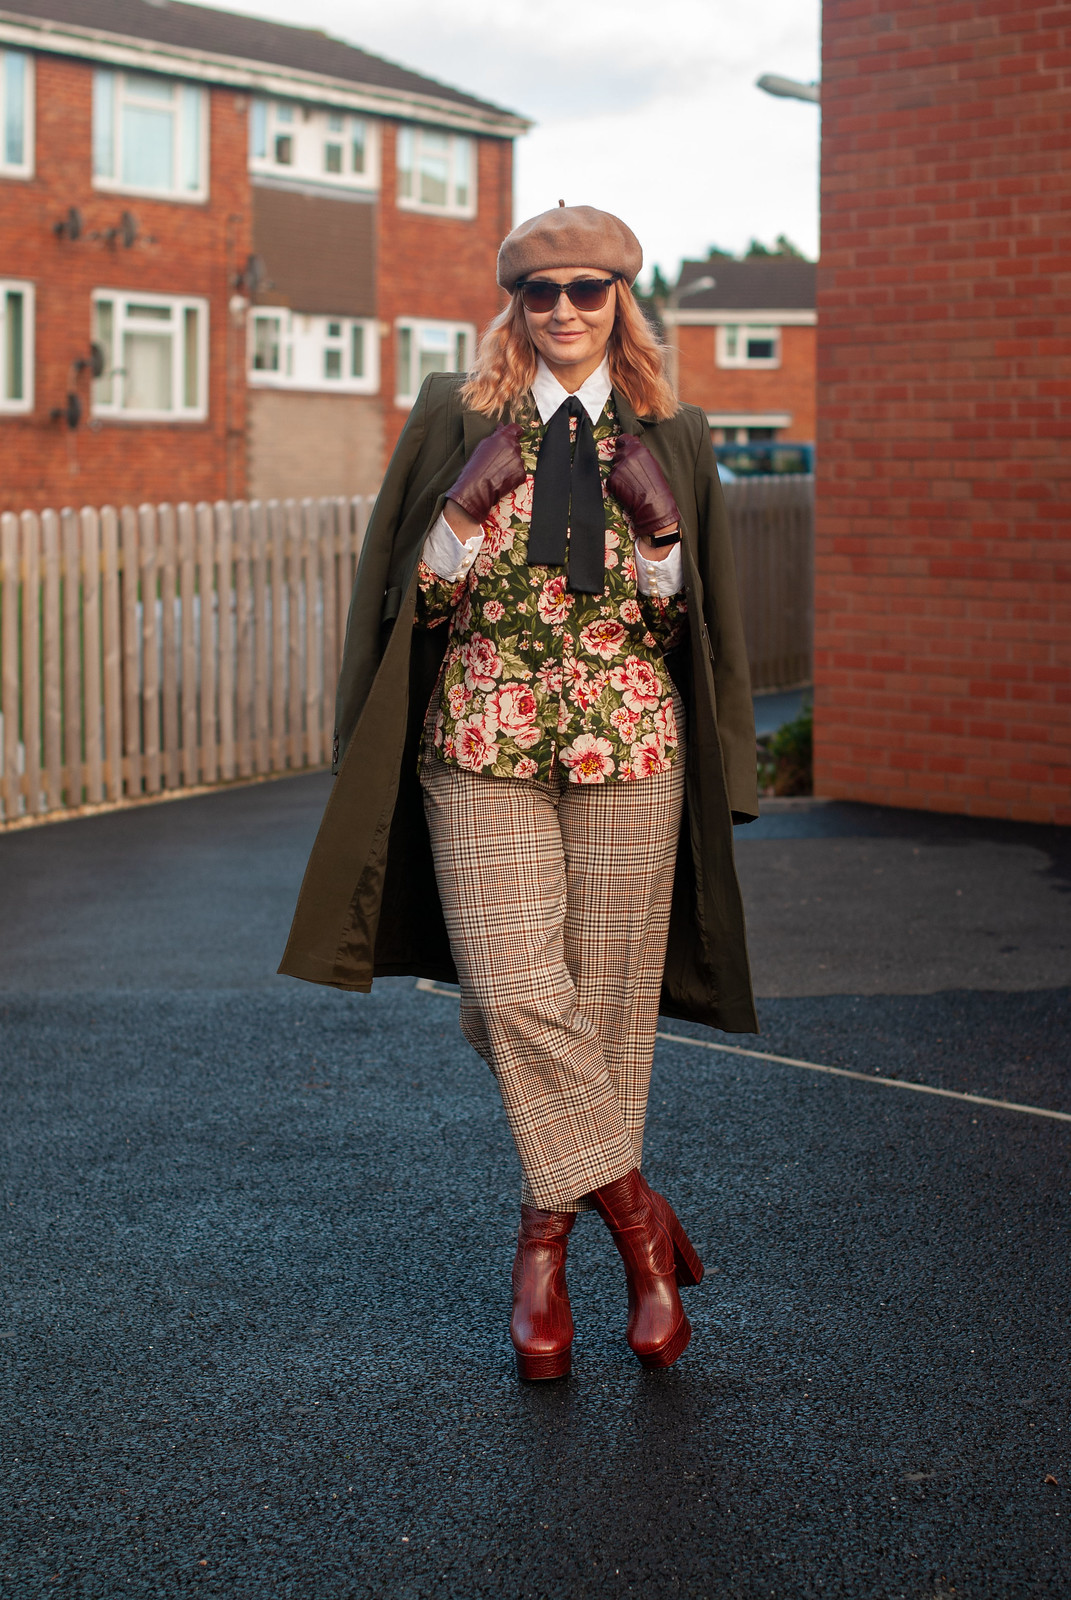 Eclectic Style: Mixed Patterns and Platform Boots | Not Dressed As Lamb, Fashion and Style for Over 40 Women